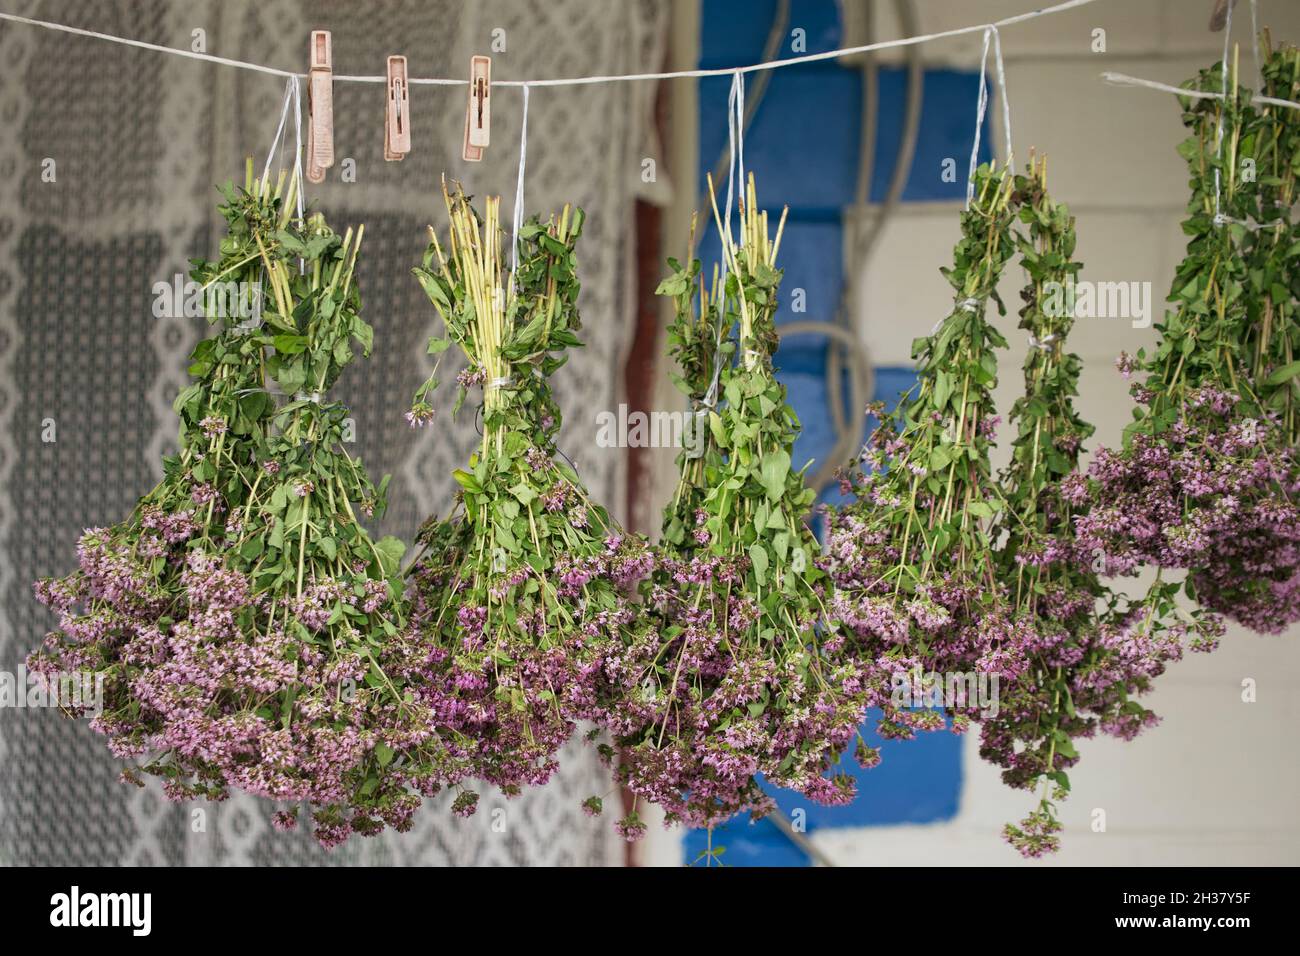 Bunches of oregano herbs. A healing plant with purple flowers. Stock Photo